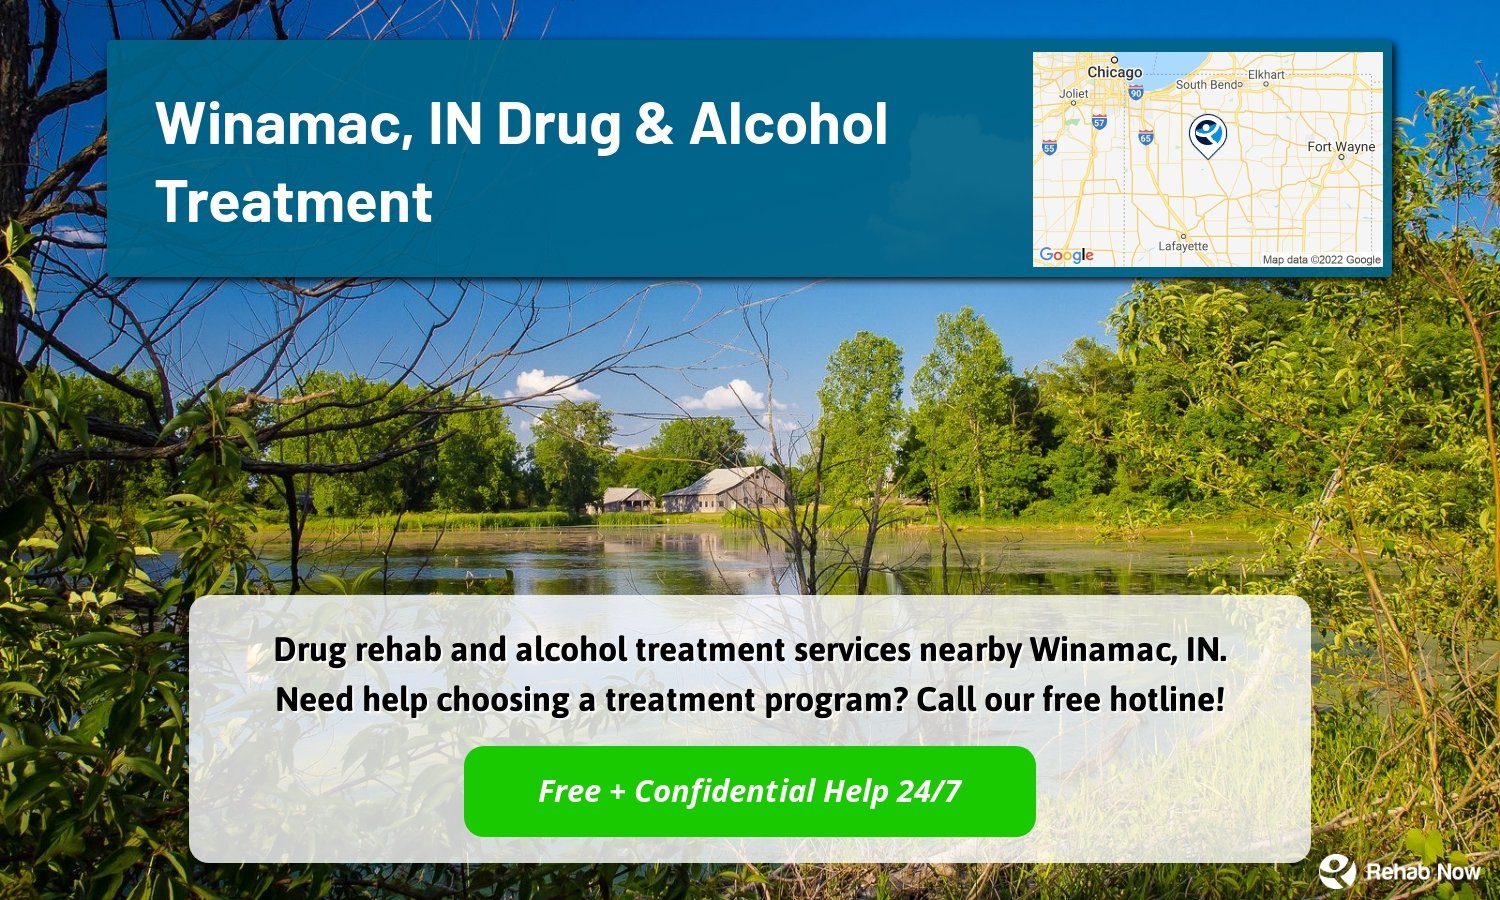 Drug rehab and alcohol treatment services nearby Winamac, IN. Need help choosing a treatment program? Call our free hotline!